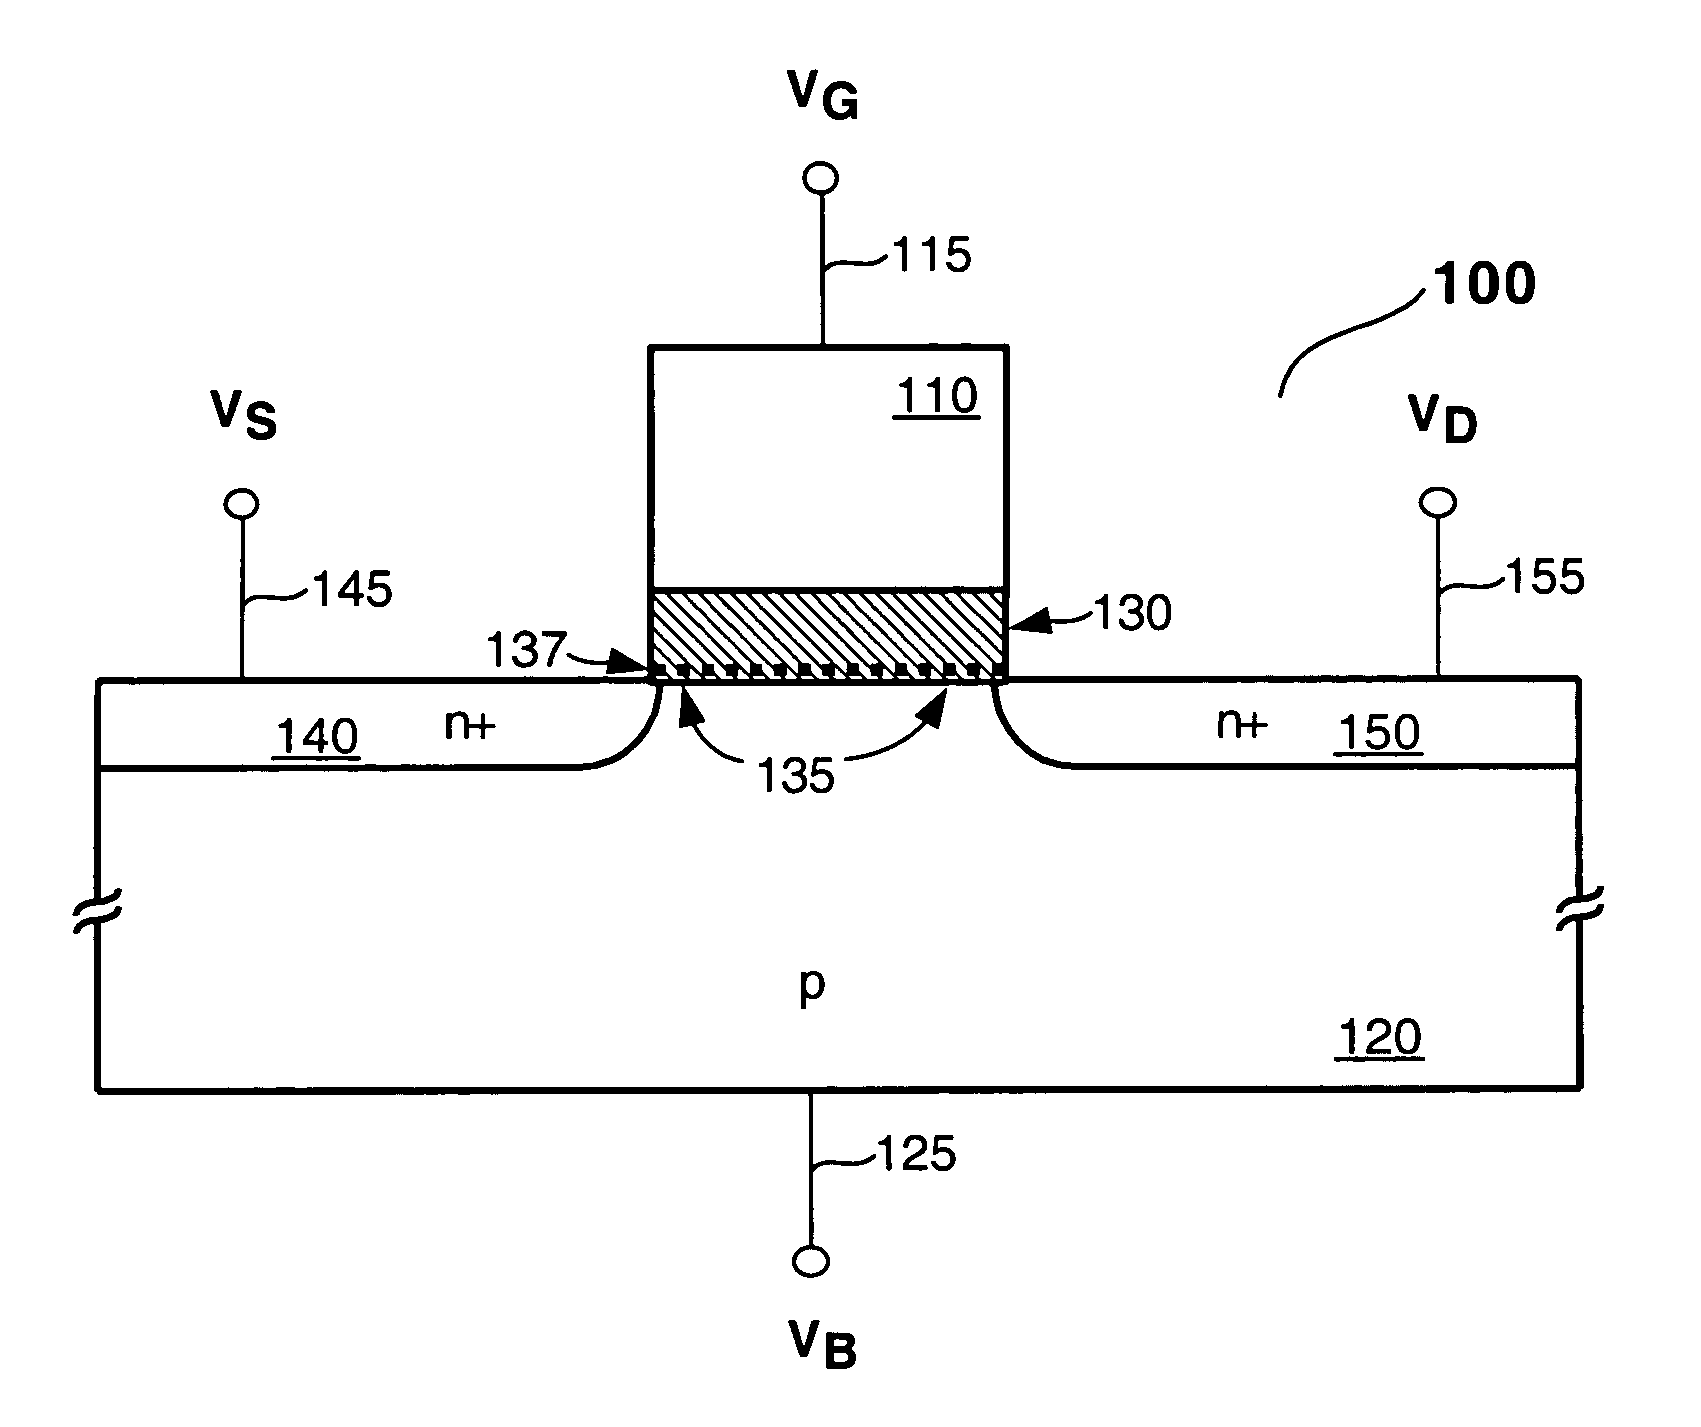 Methods of testing/stressing a charge trapping device